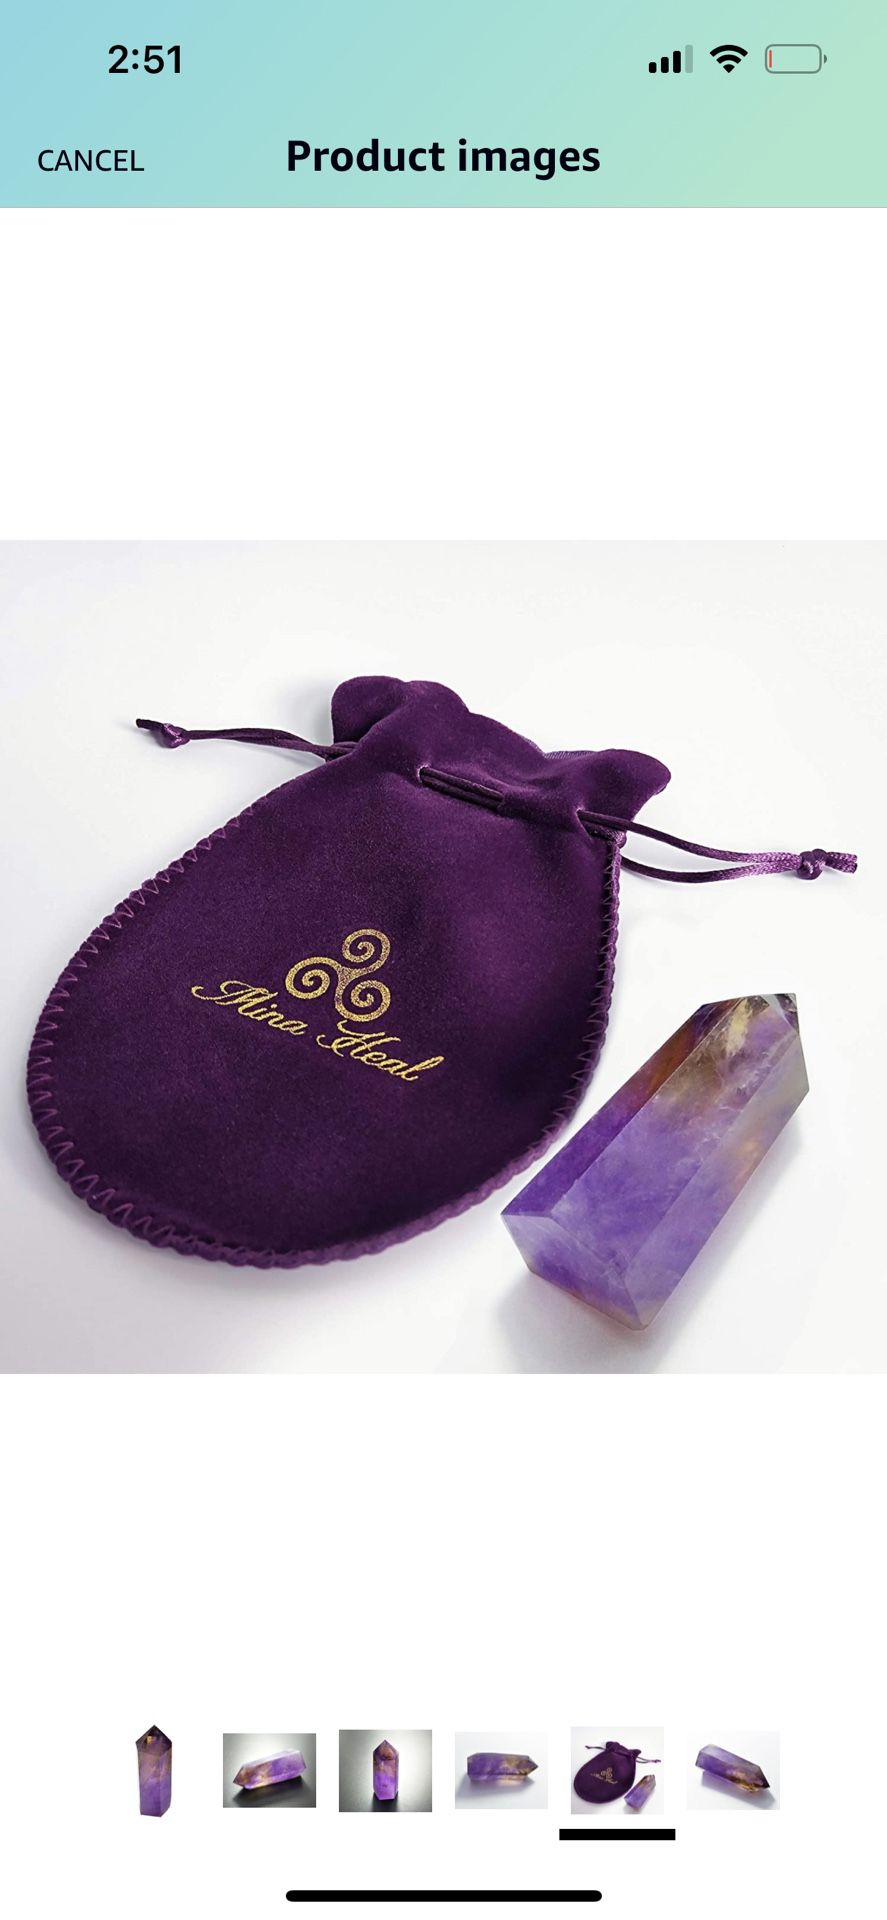 Amethyst Healing Crystal Wand Pointed & Faceted Prism Bar for Reiki Chakra Meditation Therapy Deco, Small gemstomes are Gifts (Colors May Vary Due Nat